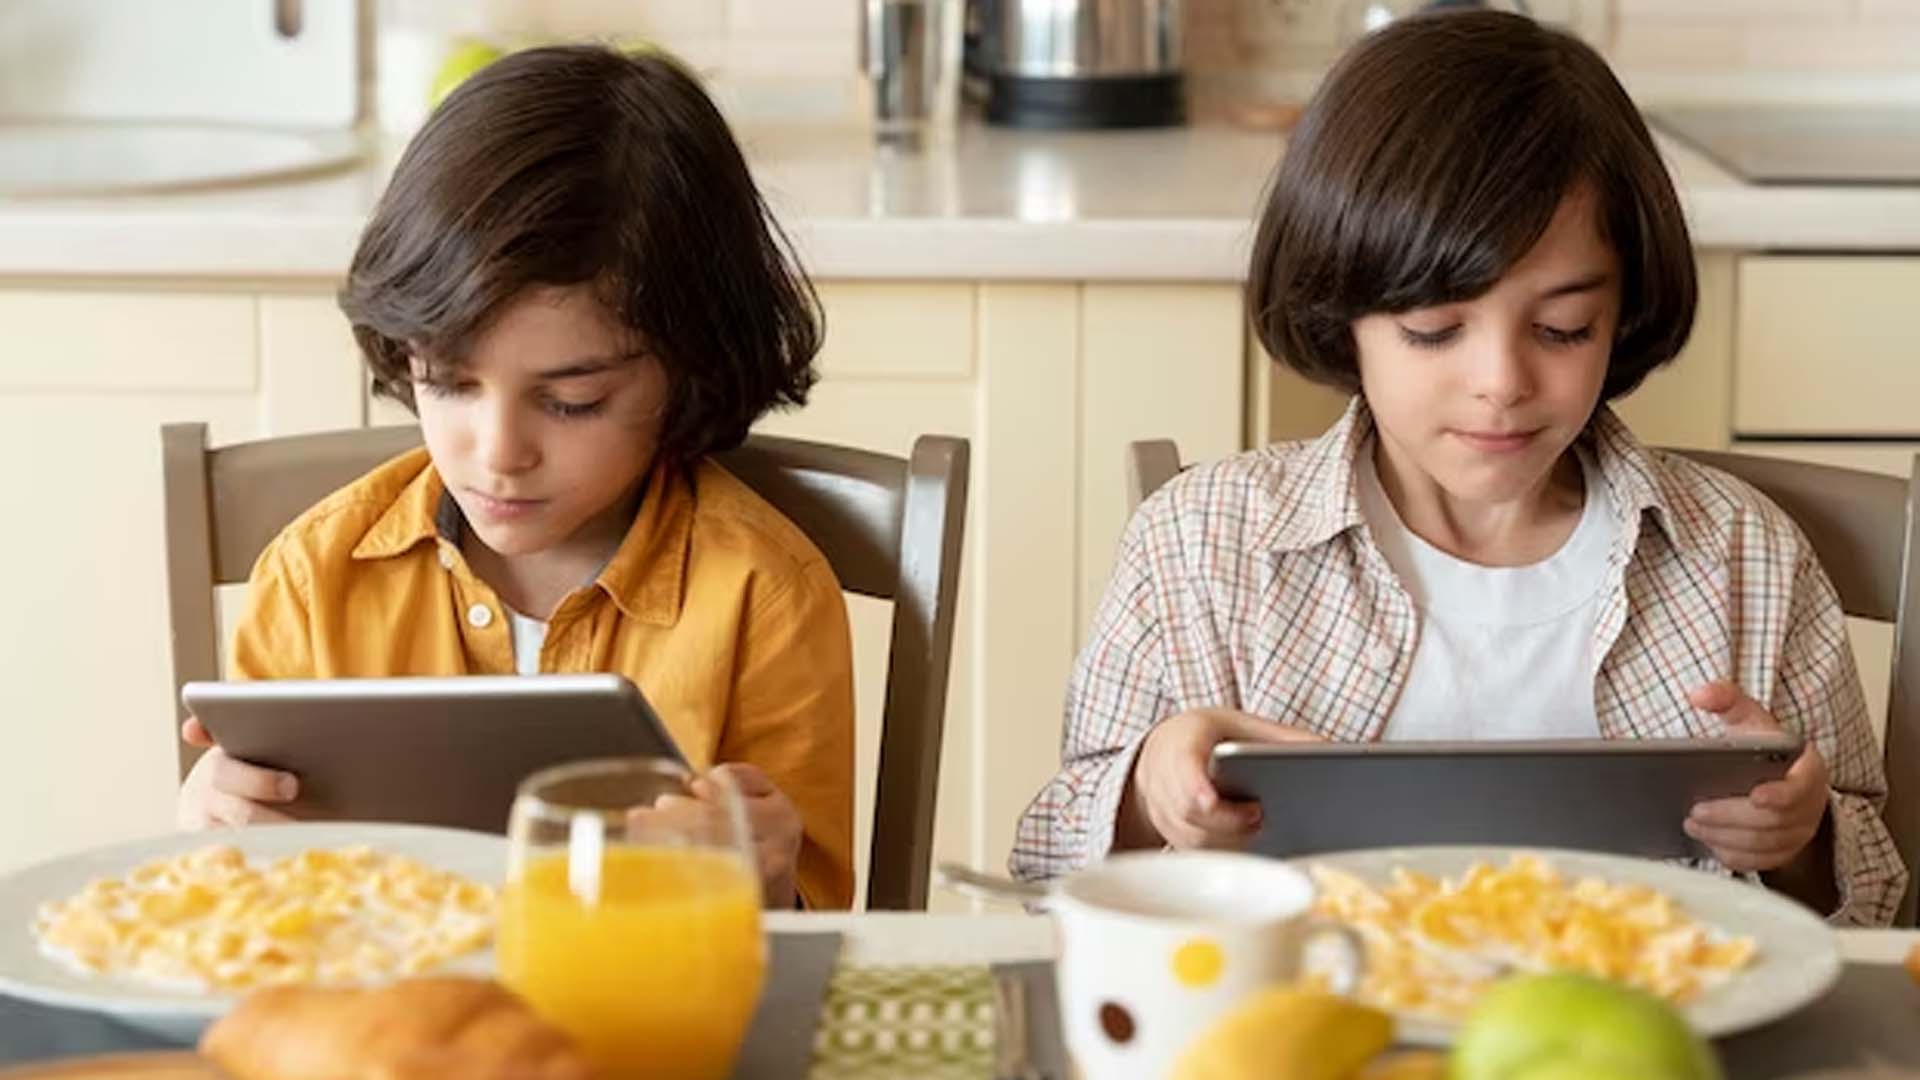 Children Watching Mobiles Without Eating